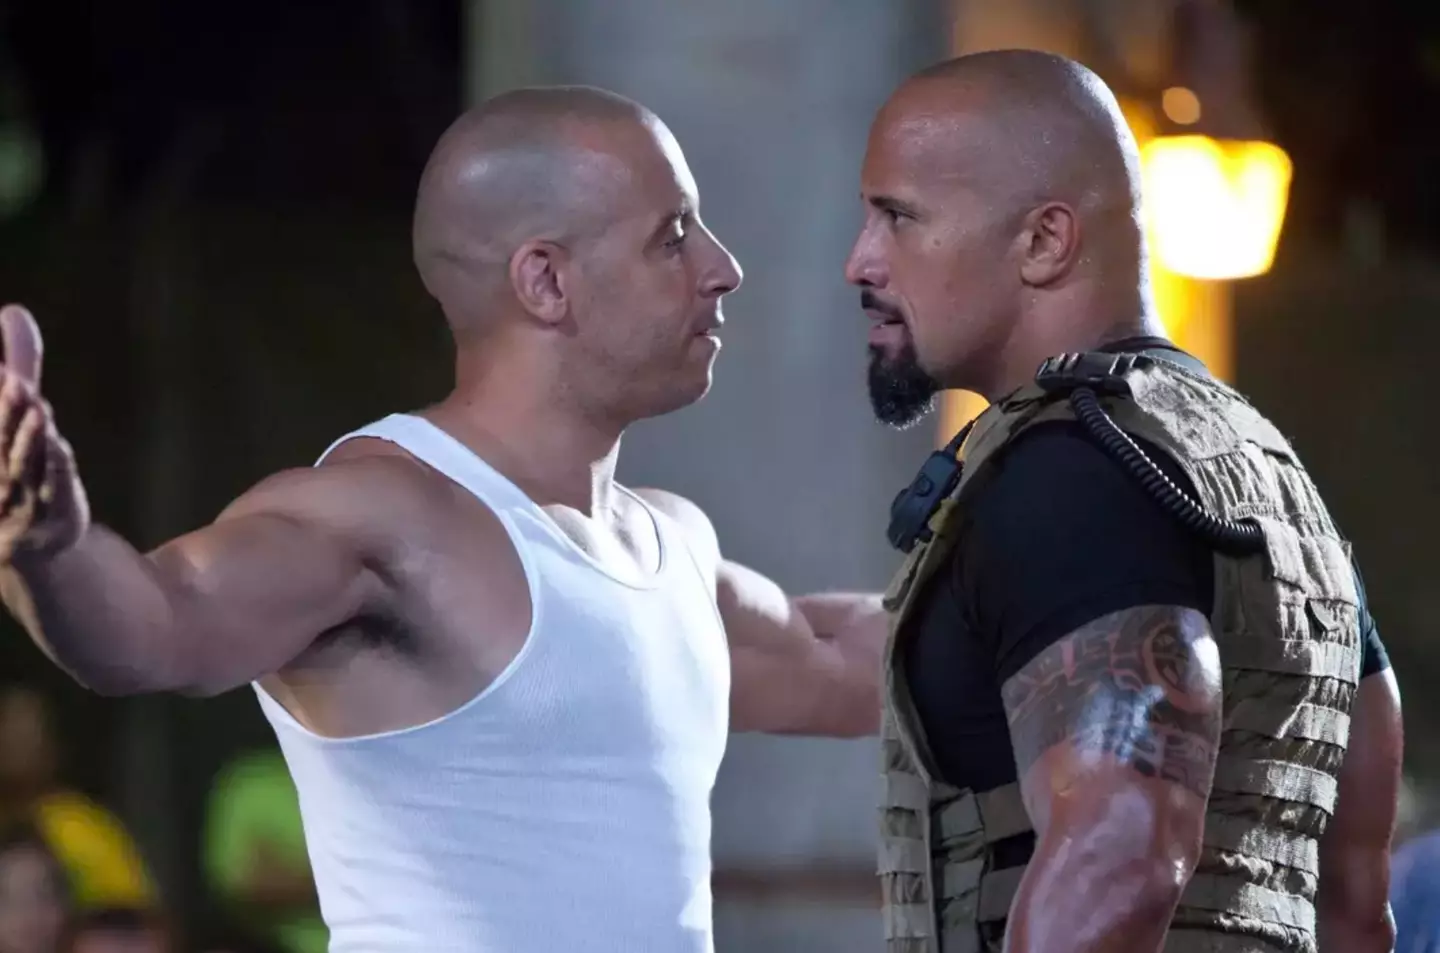 Vin Diesel and The Rock didn't see eye to eye on set.